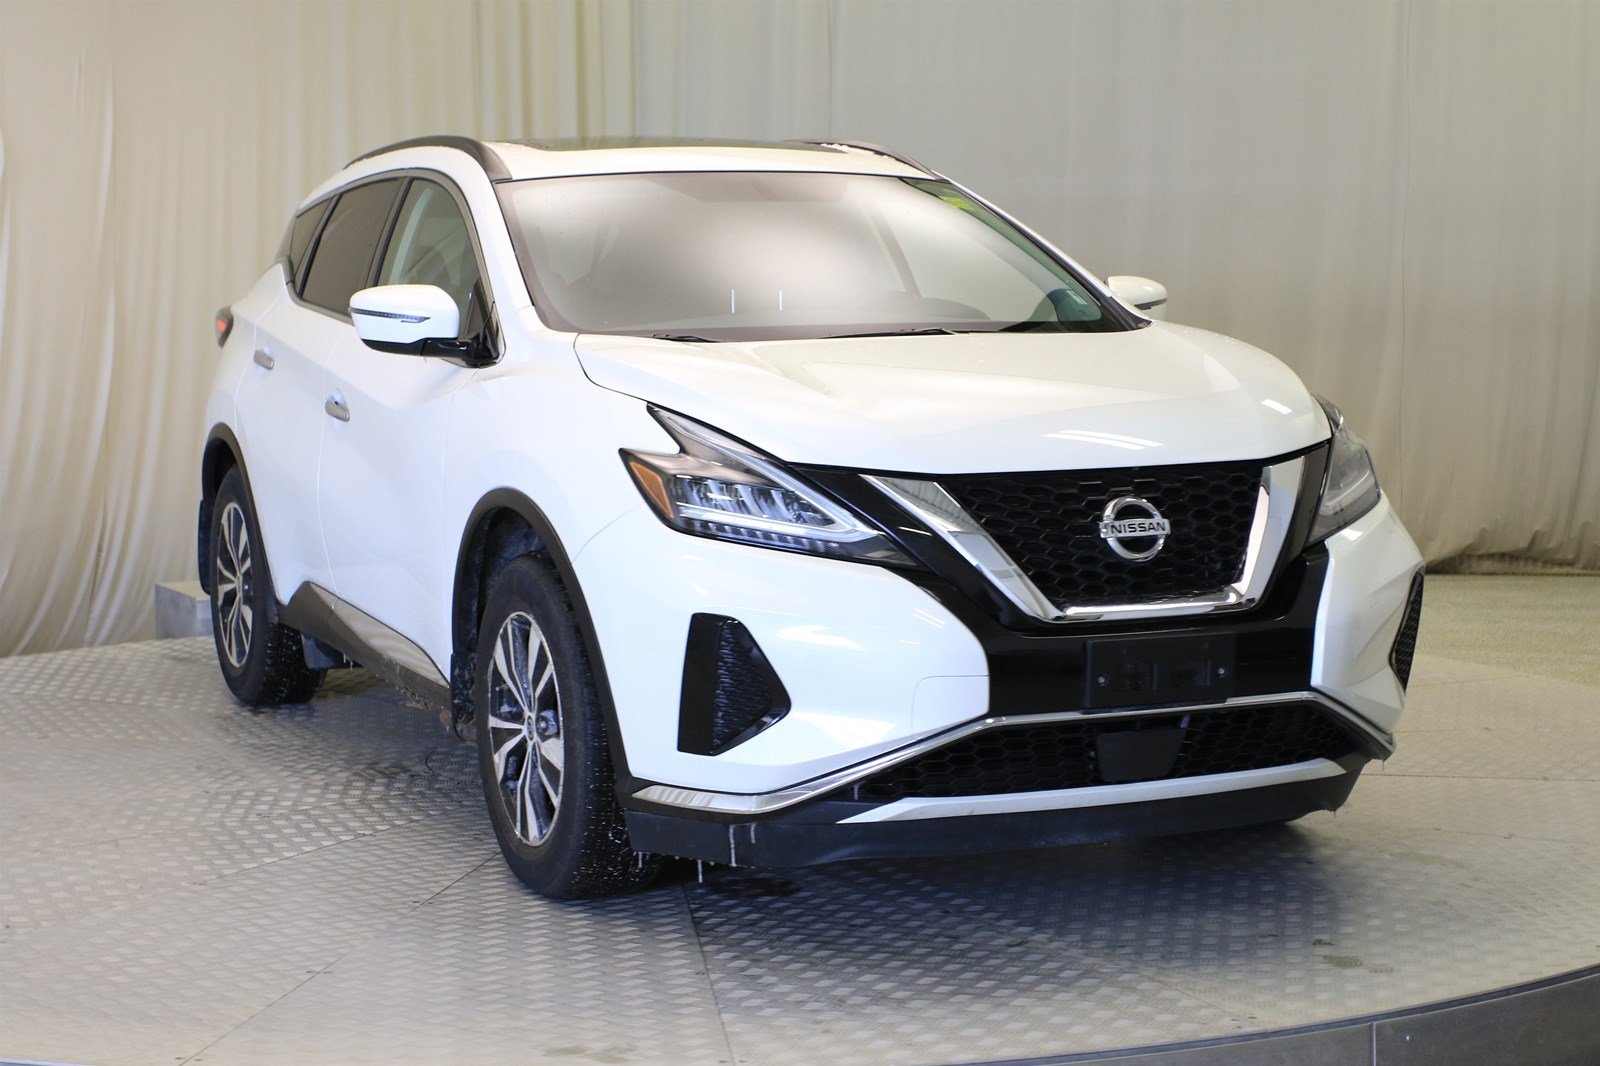 PreOwned 2019 Nissan Murano SV Sunroof AWD SUV in